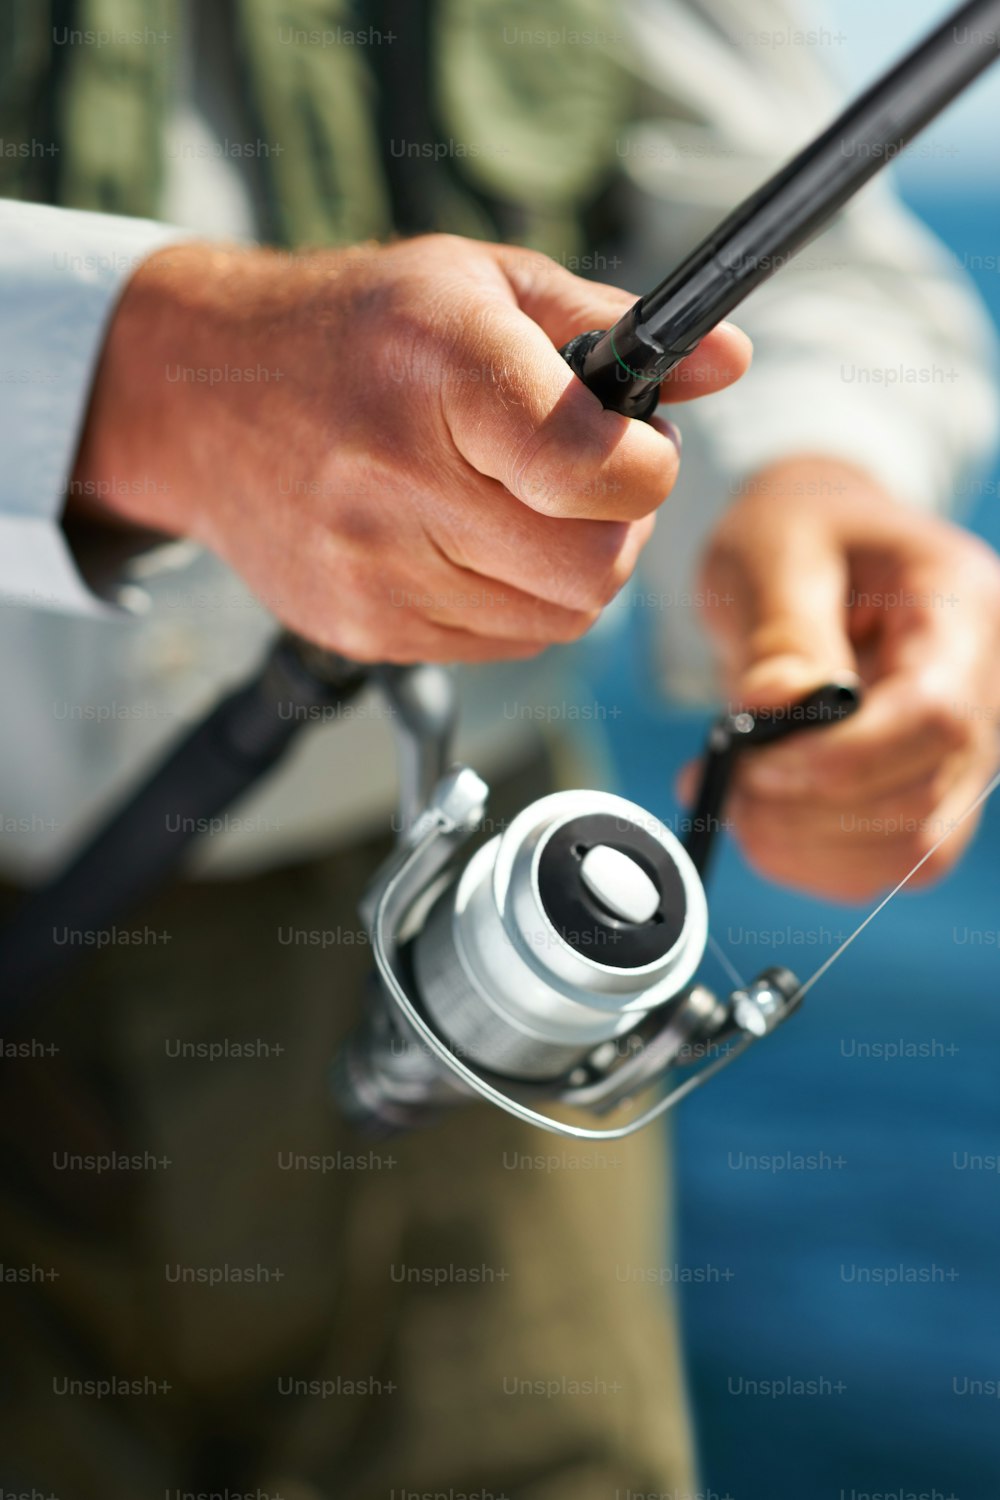 A man holding a fishing rod and a reel photo – Adult Image on Unsplash